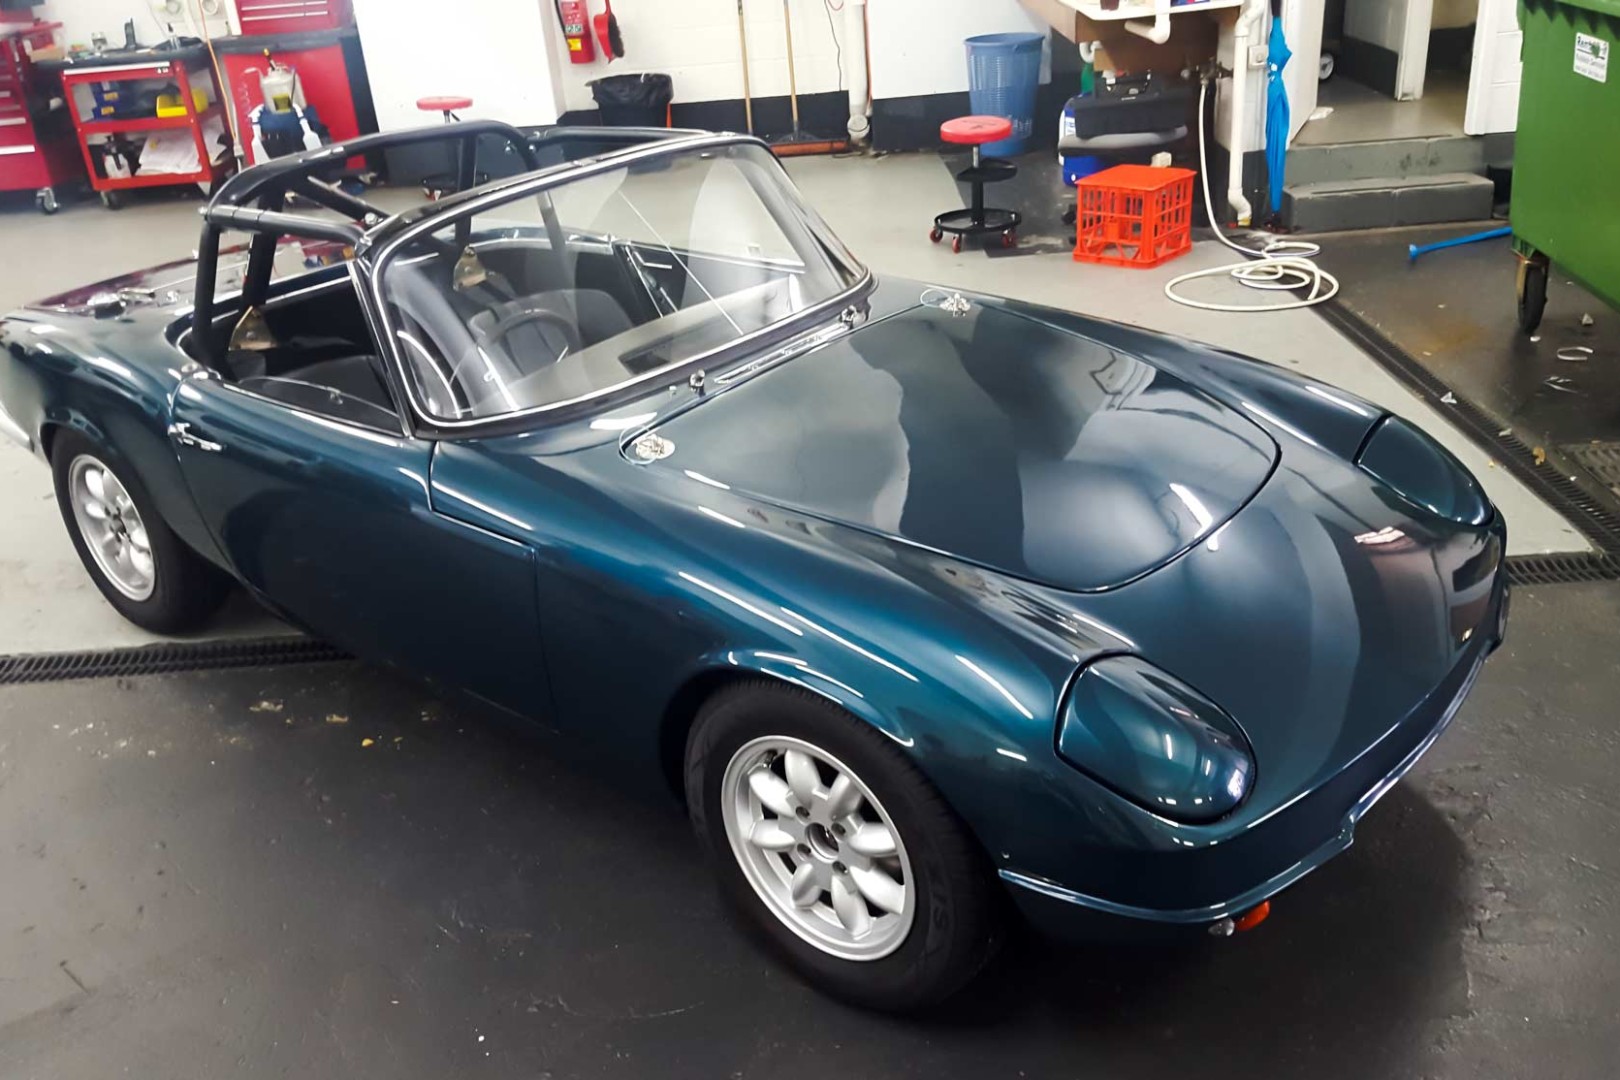 This 1964 Lotus Elan circuit racer has has the entire front end wrapped including headlights, lower fender, guards, and bonnet, to preserve its paint, and delicate fibreglass shell.